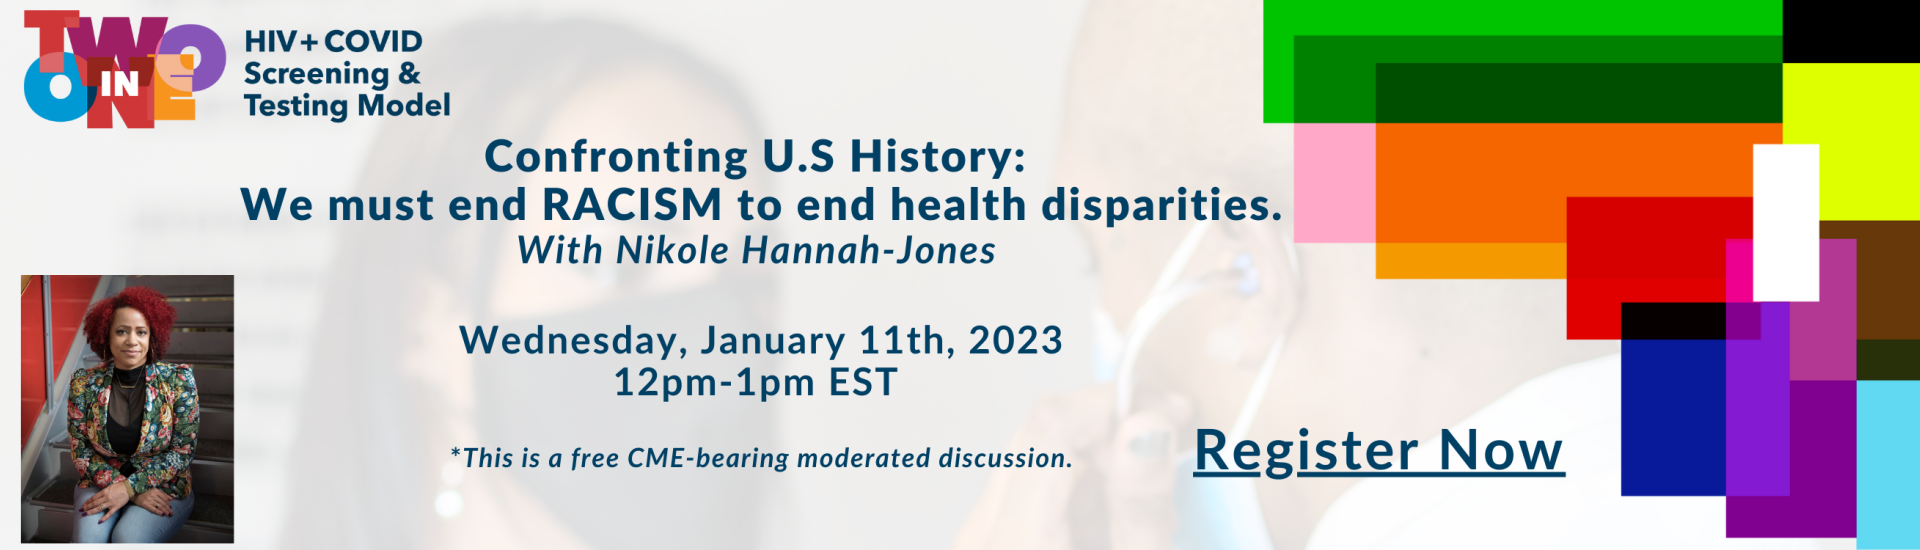 Confronting U.S. History: We must end RACISM to end health disparities. With Nikole Hannah-Jones Wednesday, January 11th, 2023 12pm - 1pm EST Register Now